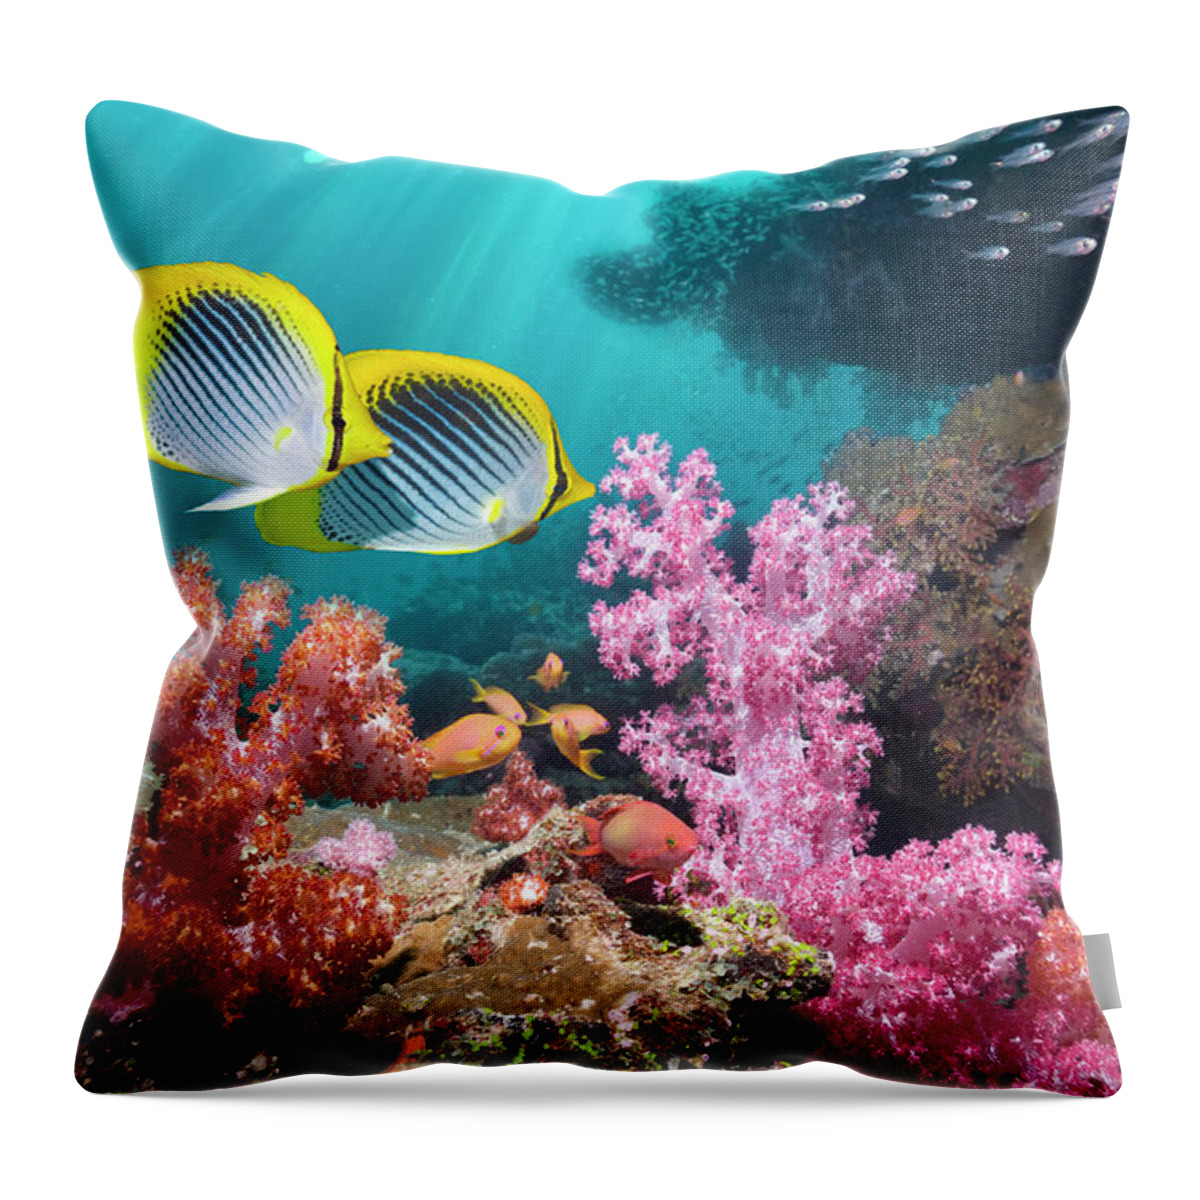 Tranquility Throw Pillow featuring the photograph Butterflyfish With Soft Corals by Georgette Douwma